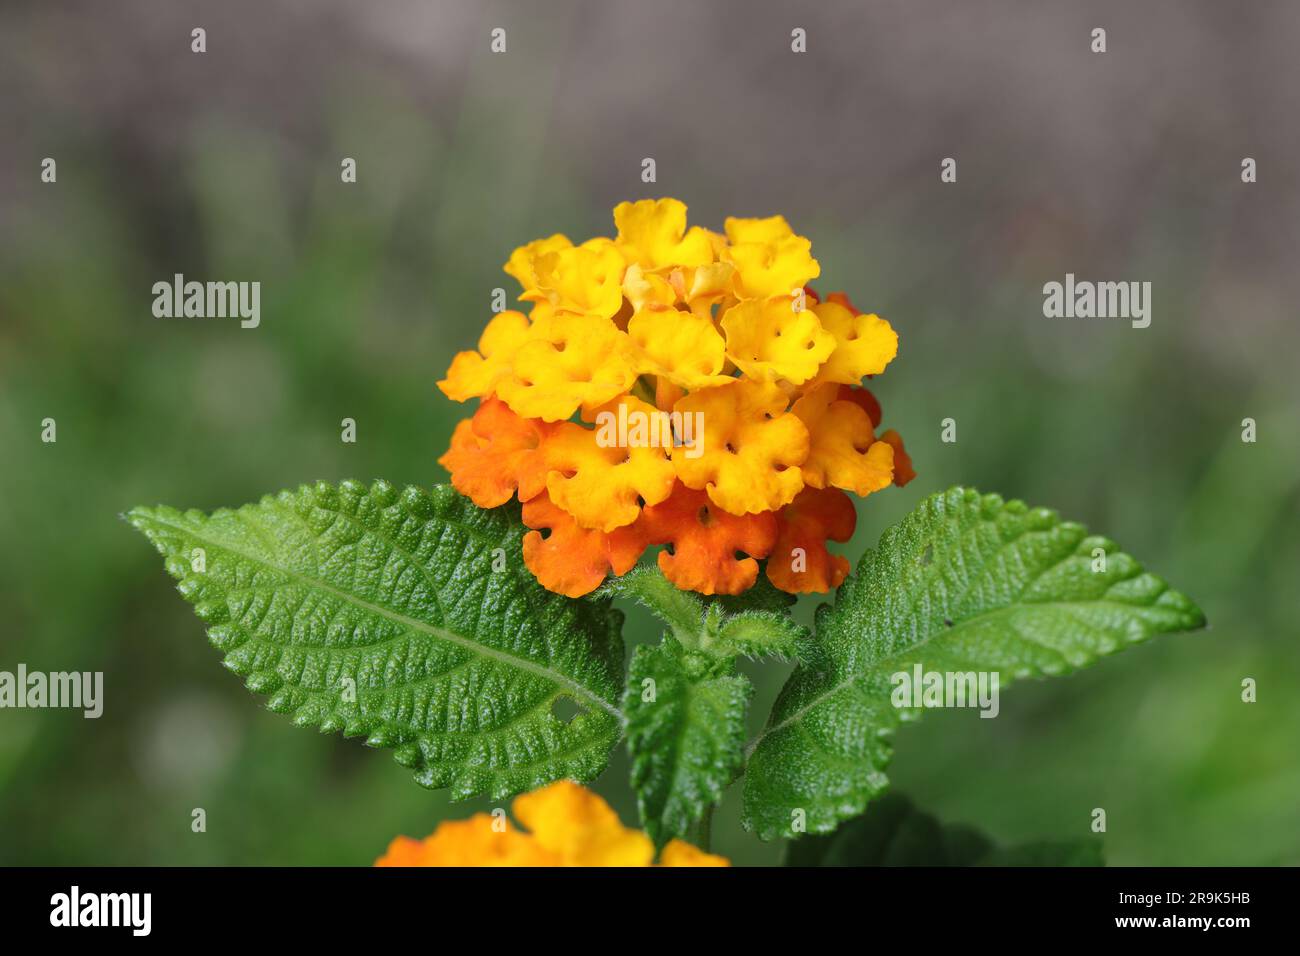 Close-up of a beautiful orange and yellow lantana flower against a blurry background, side view, copy space Stock Photo